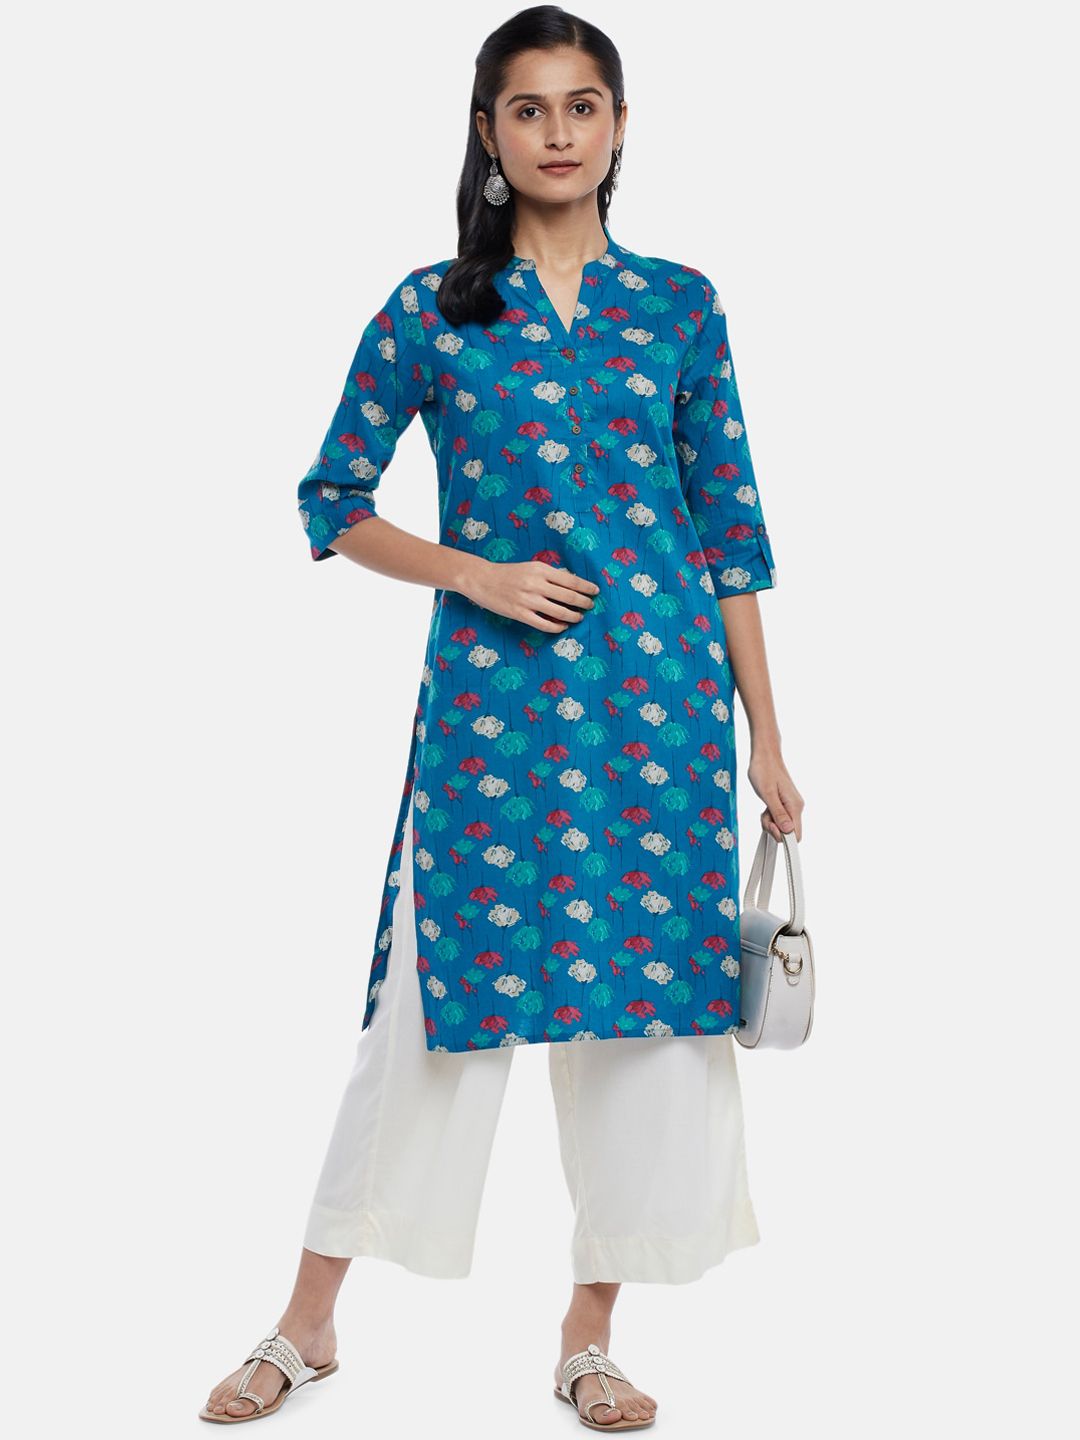 RANGMANCH BY PANTALOONS Women Blue & Red Floral Printed Cotton Straight Kurta Price in India